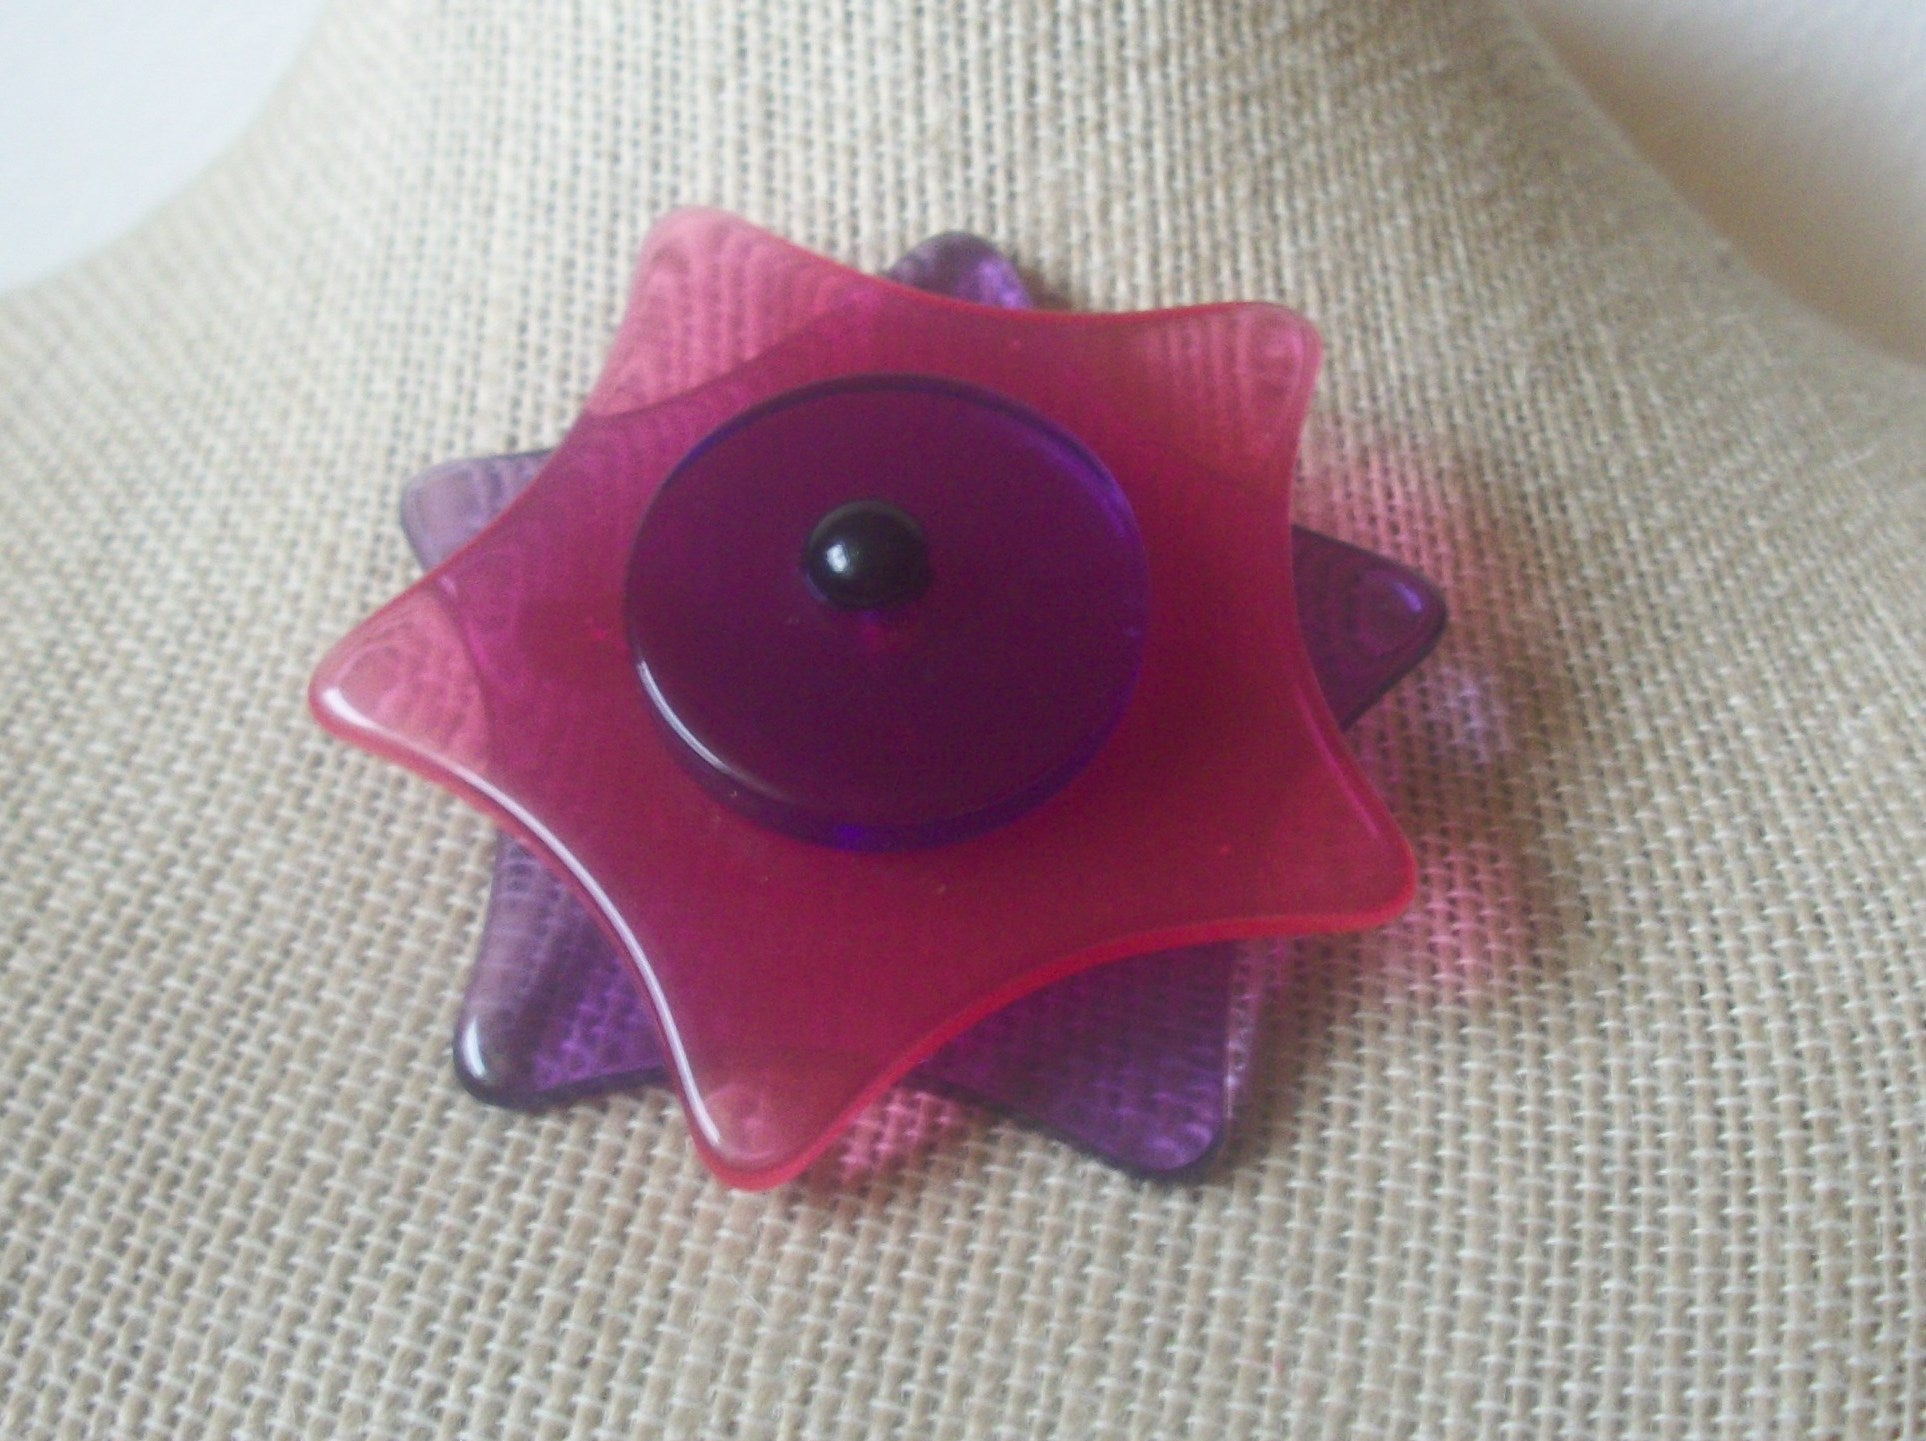 Larger Thicker, Vintage Brooch Pin, Fuchsia Purple, Old Plastic Lucite, Flower, 70217